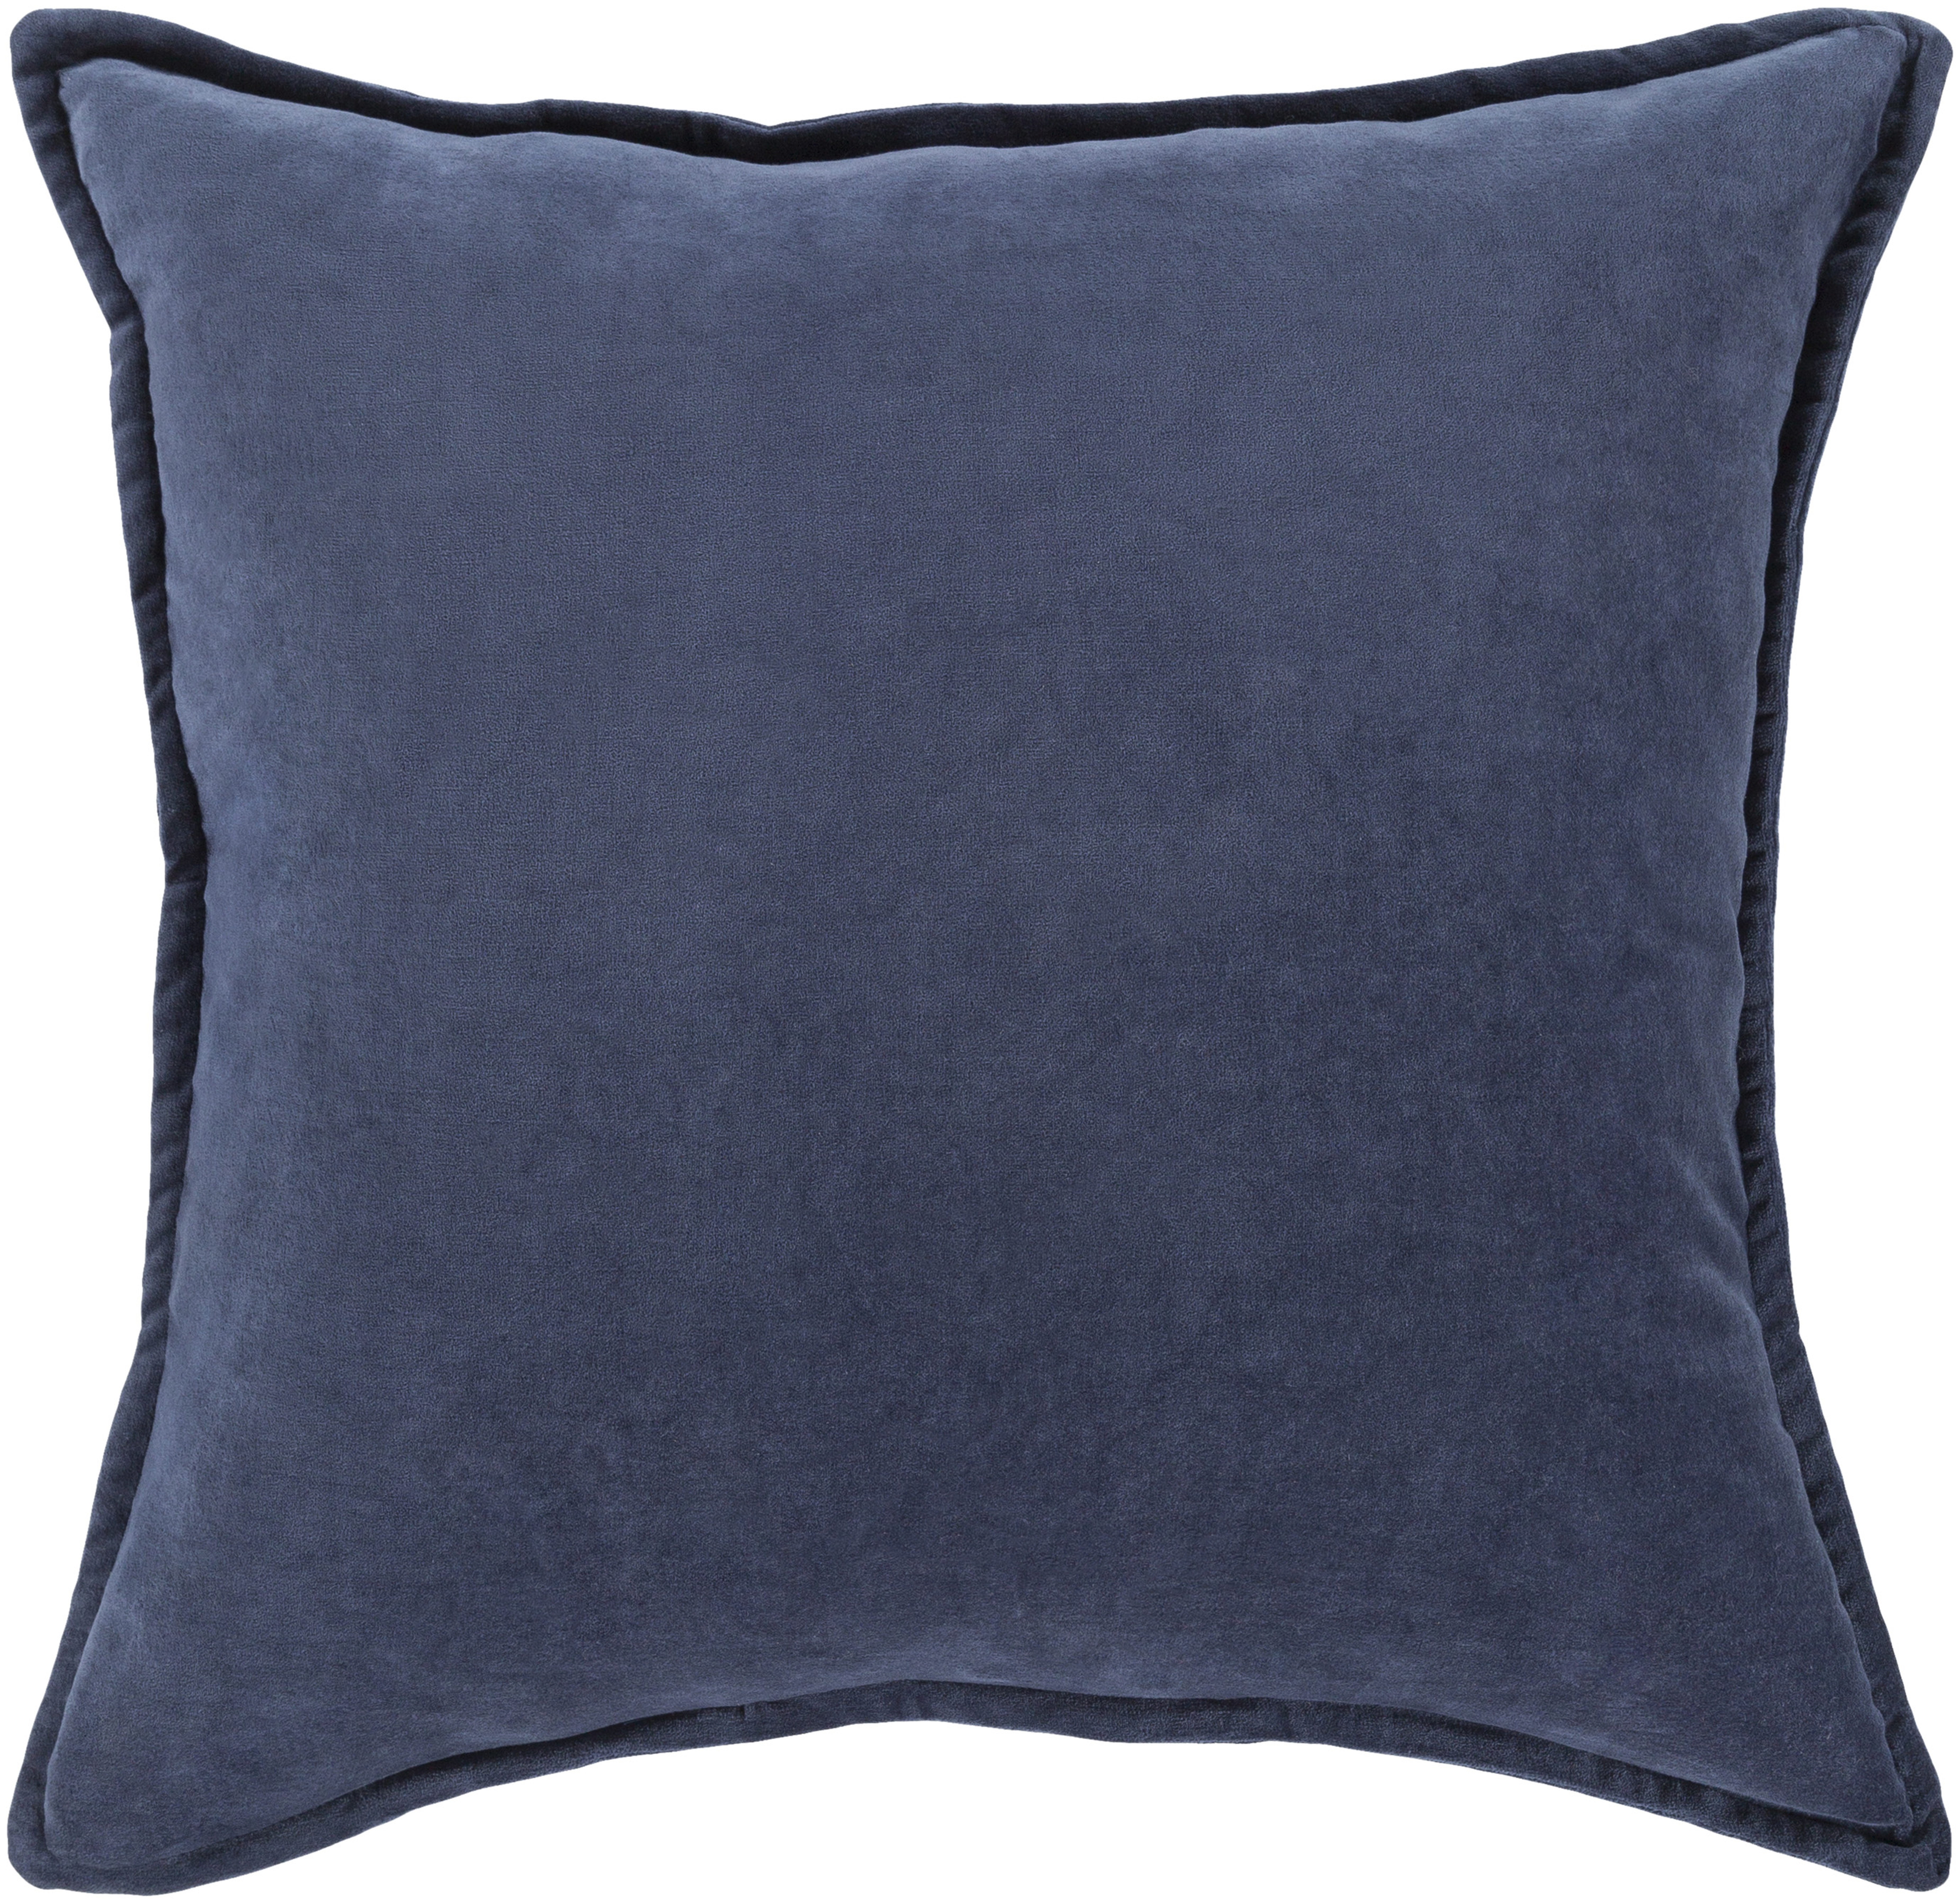 Cotton Velvet Pillow - 22x22" with Poly Insert - Surya